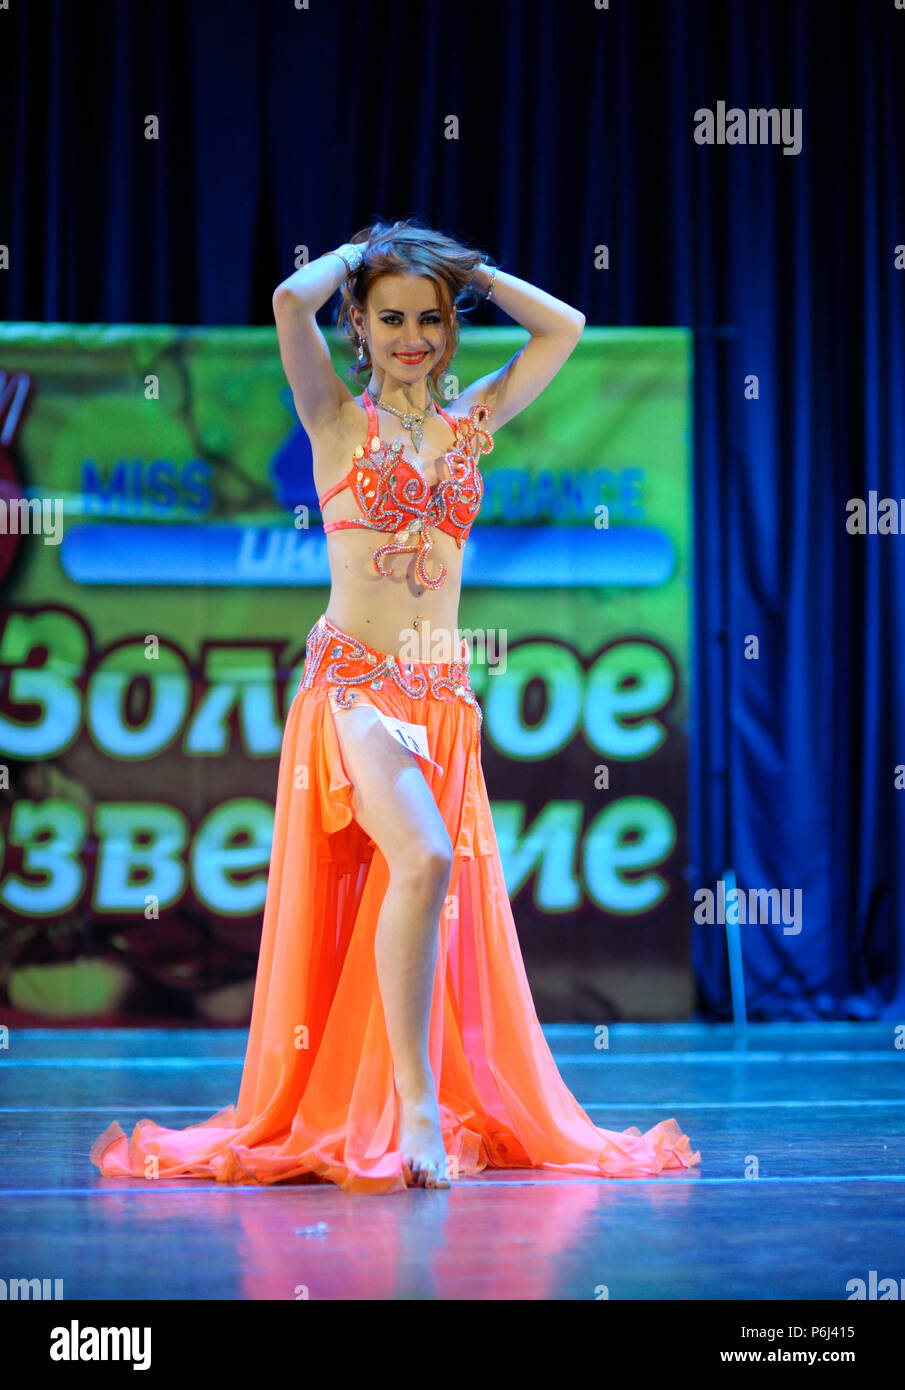 Dancer in a native dresses performing oriental dance on stage. Festival Miss Belly dance 2017. March 7, 2017. Kiev, Ukraine Stock Photo